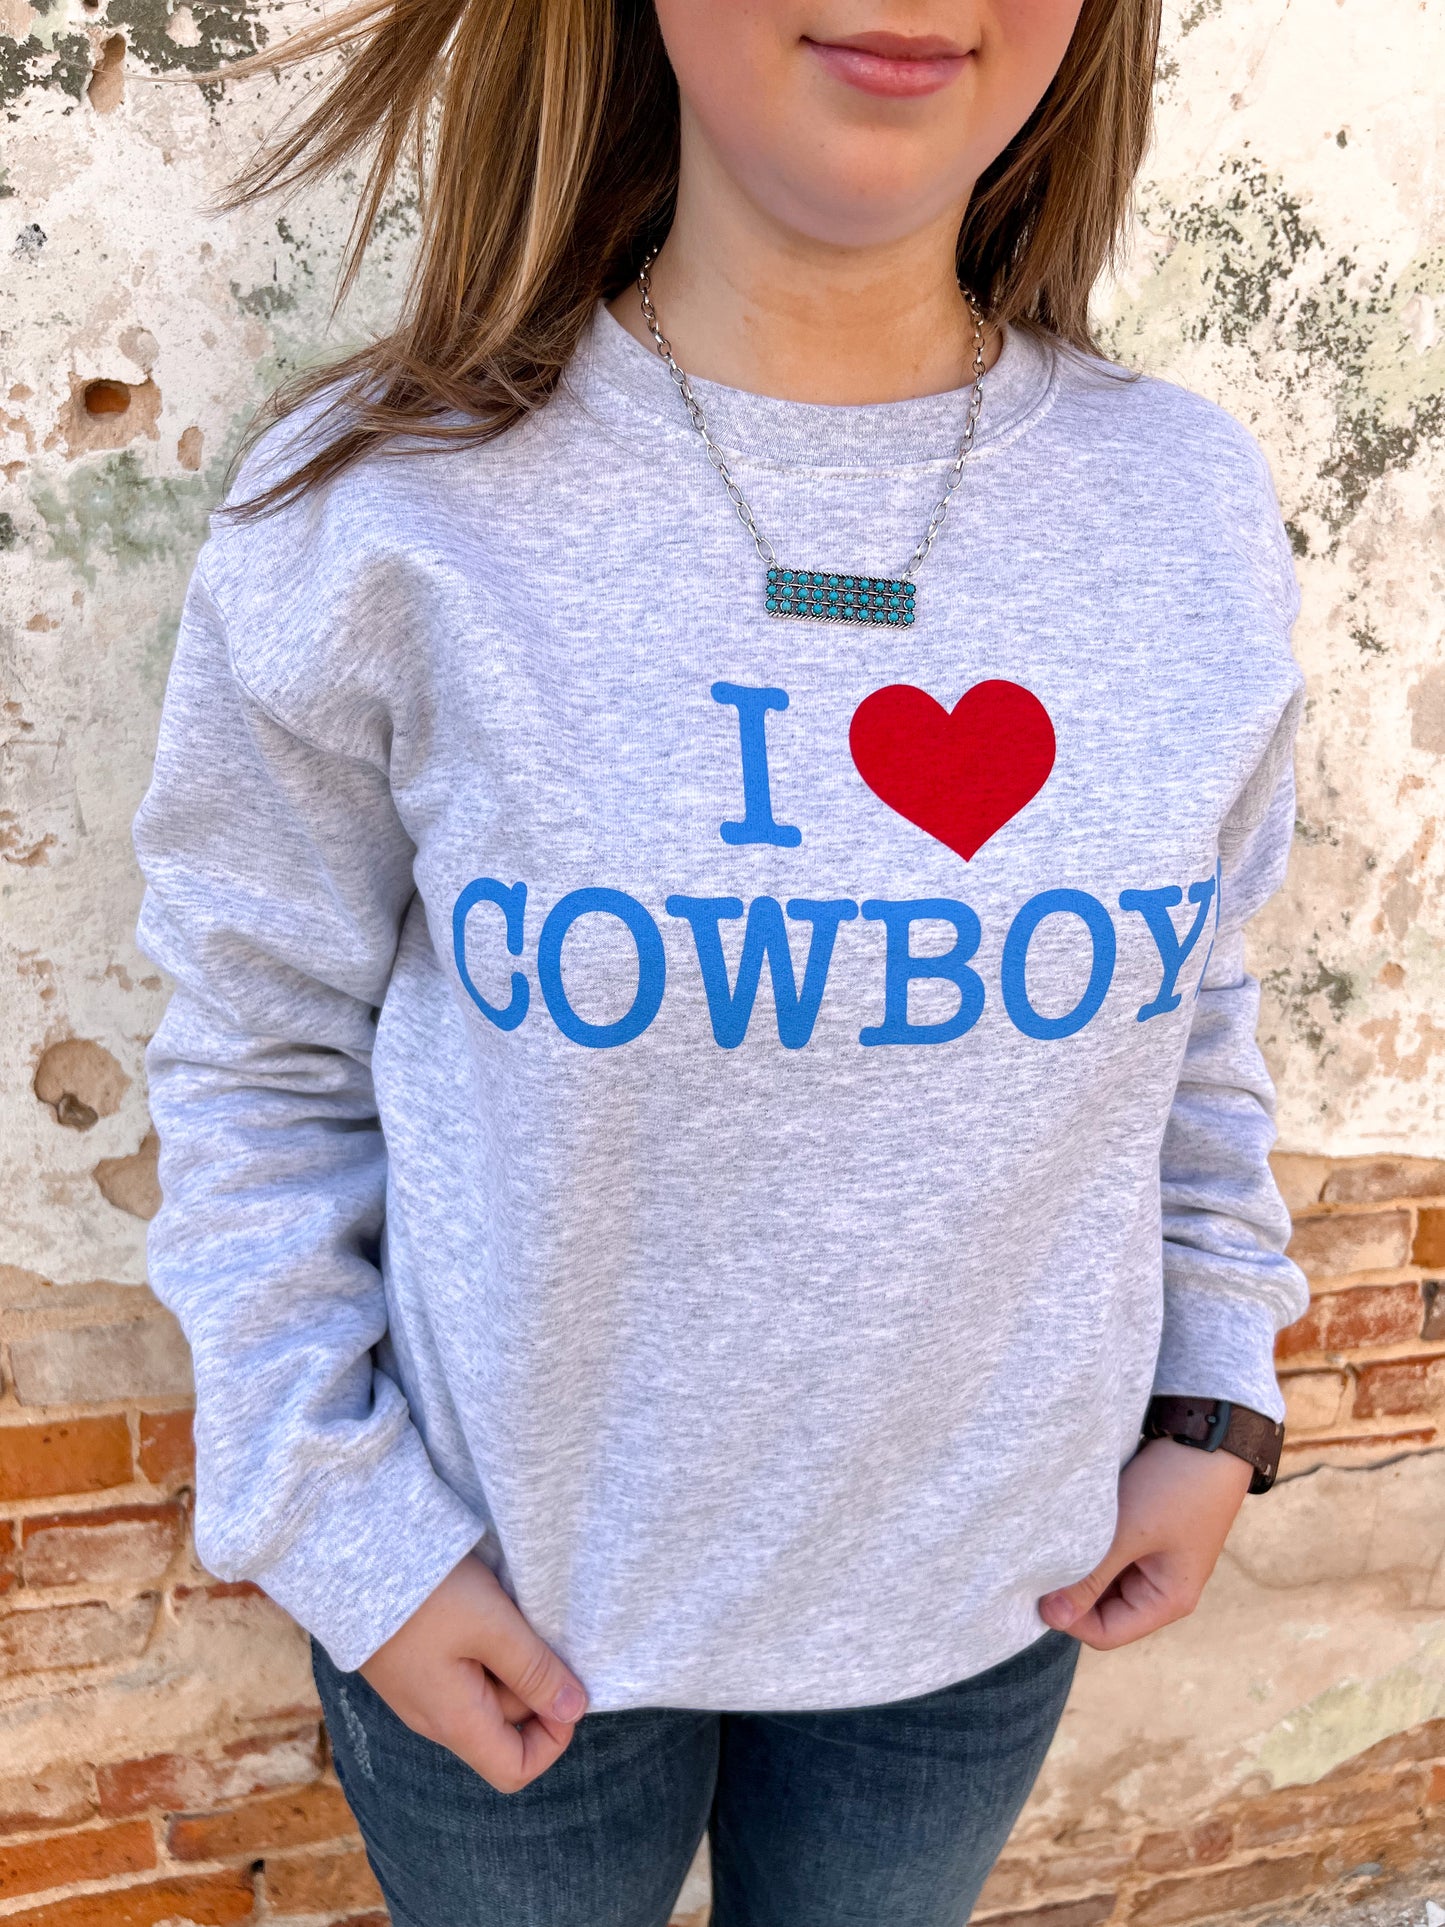 I Love Cowboys Sweatshirt-Top-friday+saturday-11/28/23 md, 1st md, Bin E5, Max Retail-The Twisted Chandelier